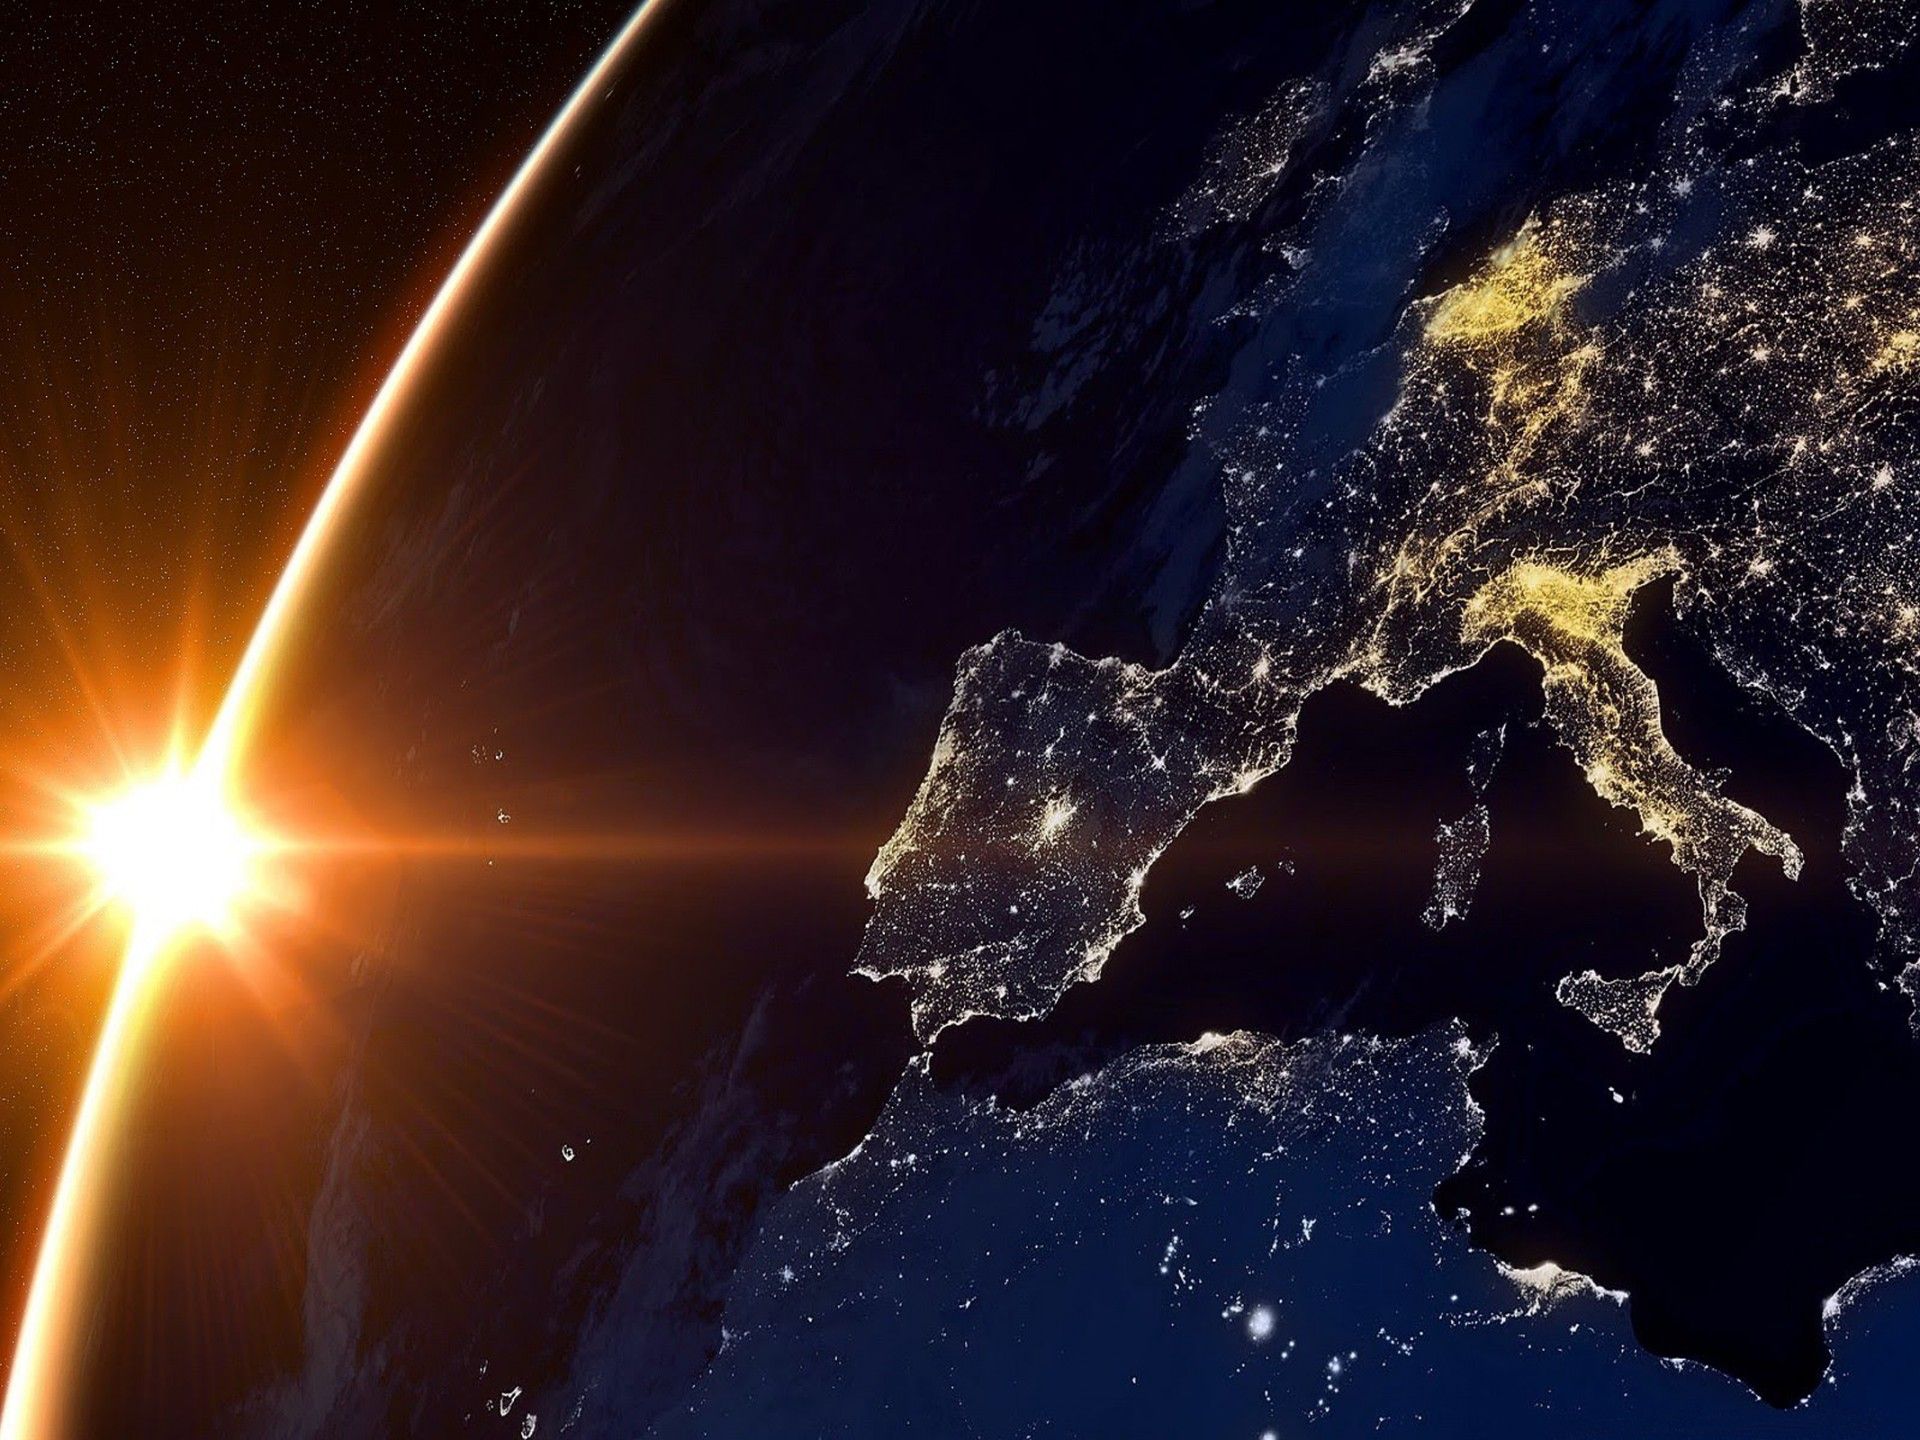 Sun And Earth From Space Europe Night HD Wallpaper, Wallpaper13.com